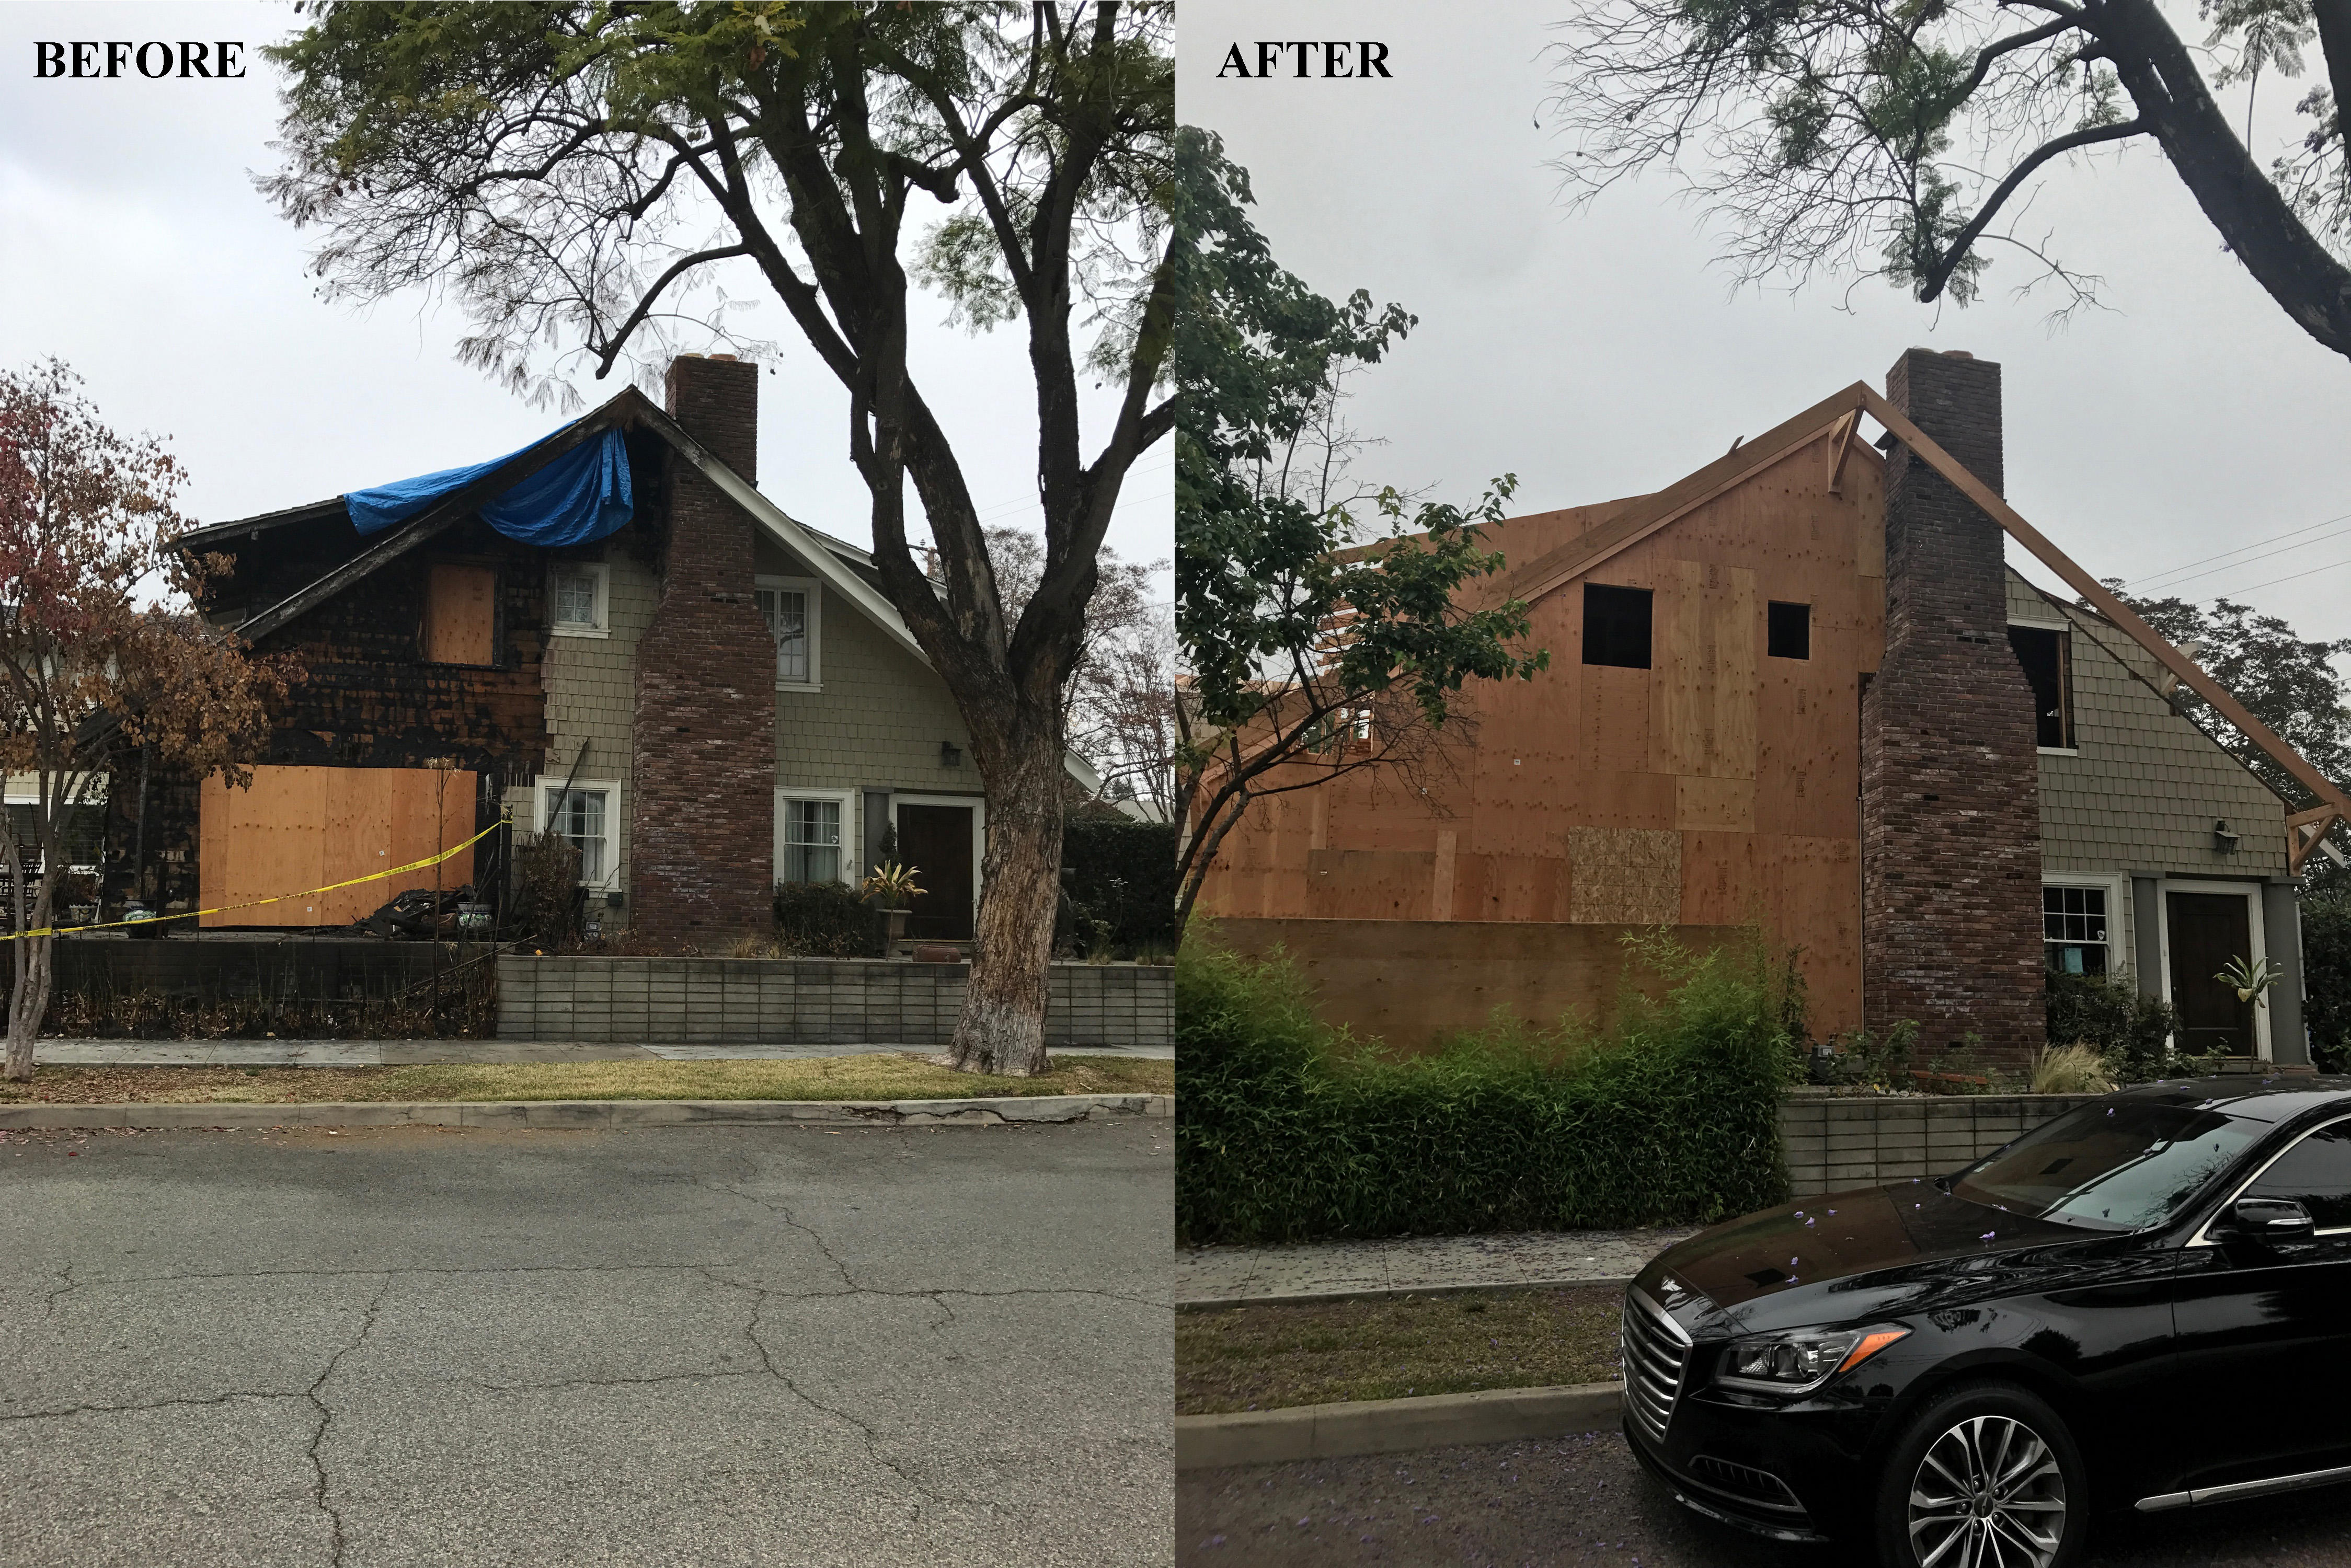 Before and After photo of a home in Canoga Park affected by a large fire. The After photo shows the home partially reconstructed after the fire damage.